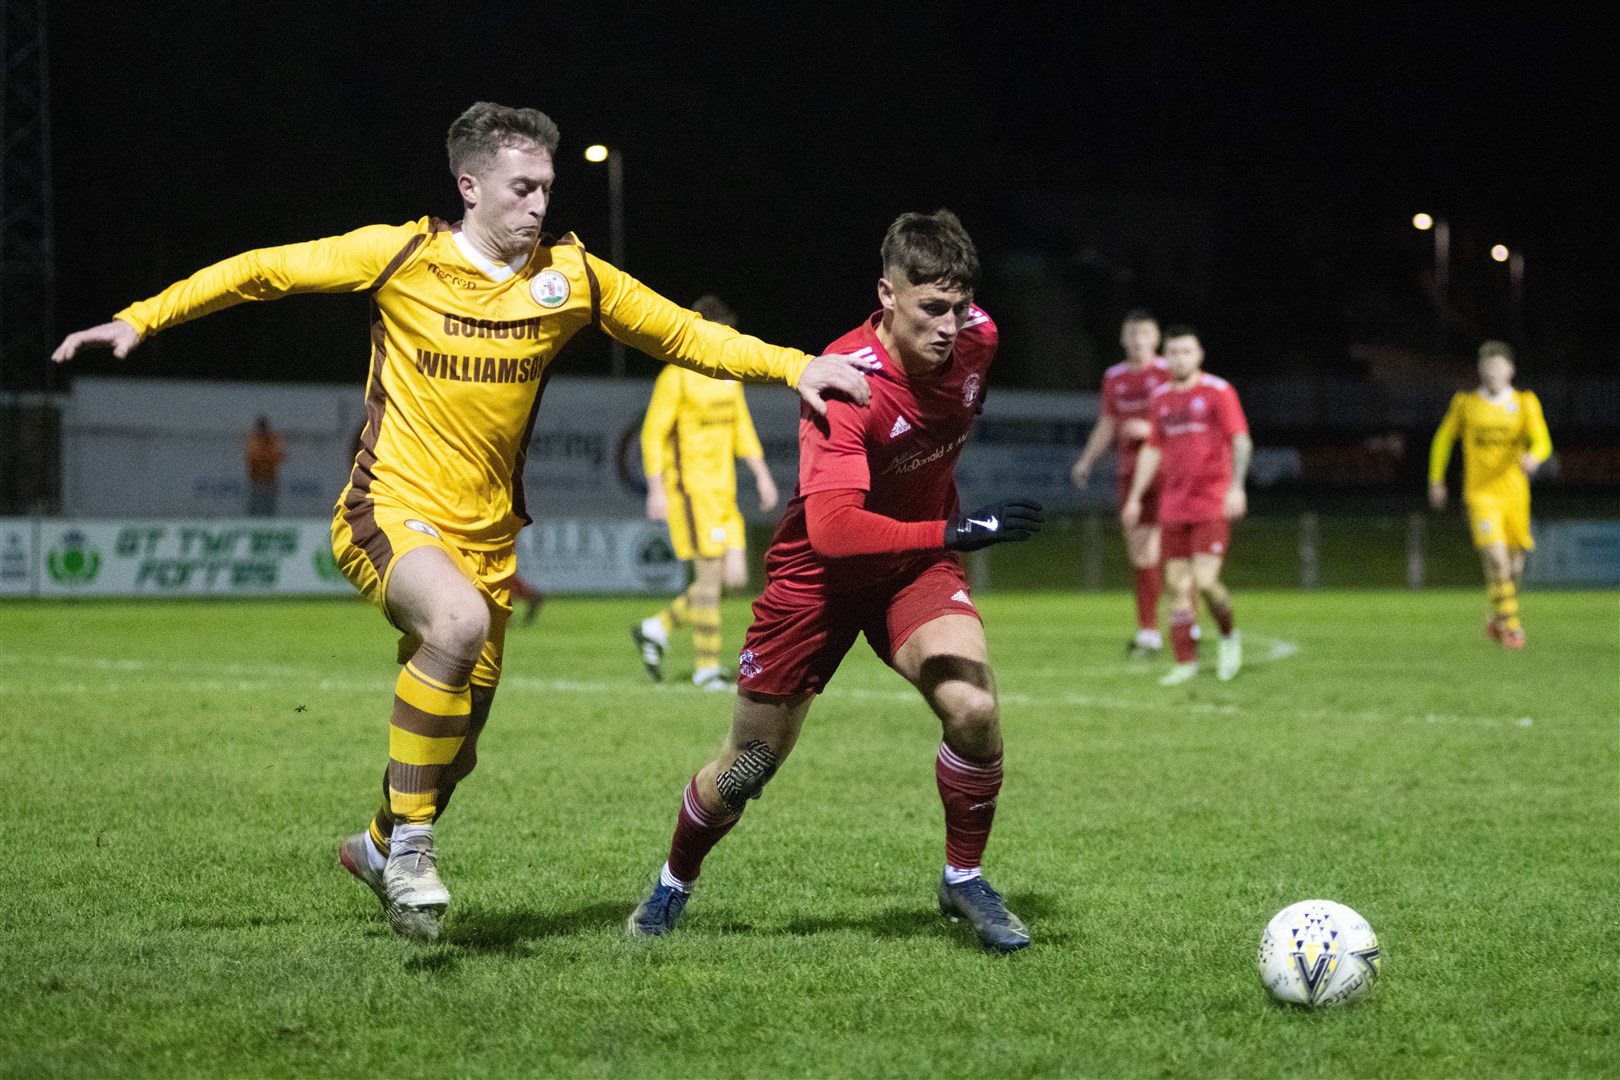 Forres' Dale Wood tries to get a hand on Lossie winger Ross Elliott...Forres Mechanics FC (1) vs Lossiemouth FC (0) - Highland Fotball League 22/23 - Mosset Park, Forres 23/12/22...Picture: Daniel Forsyth..